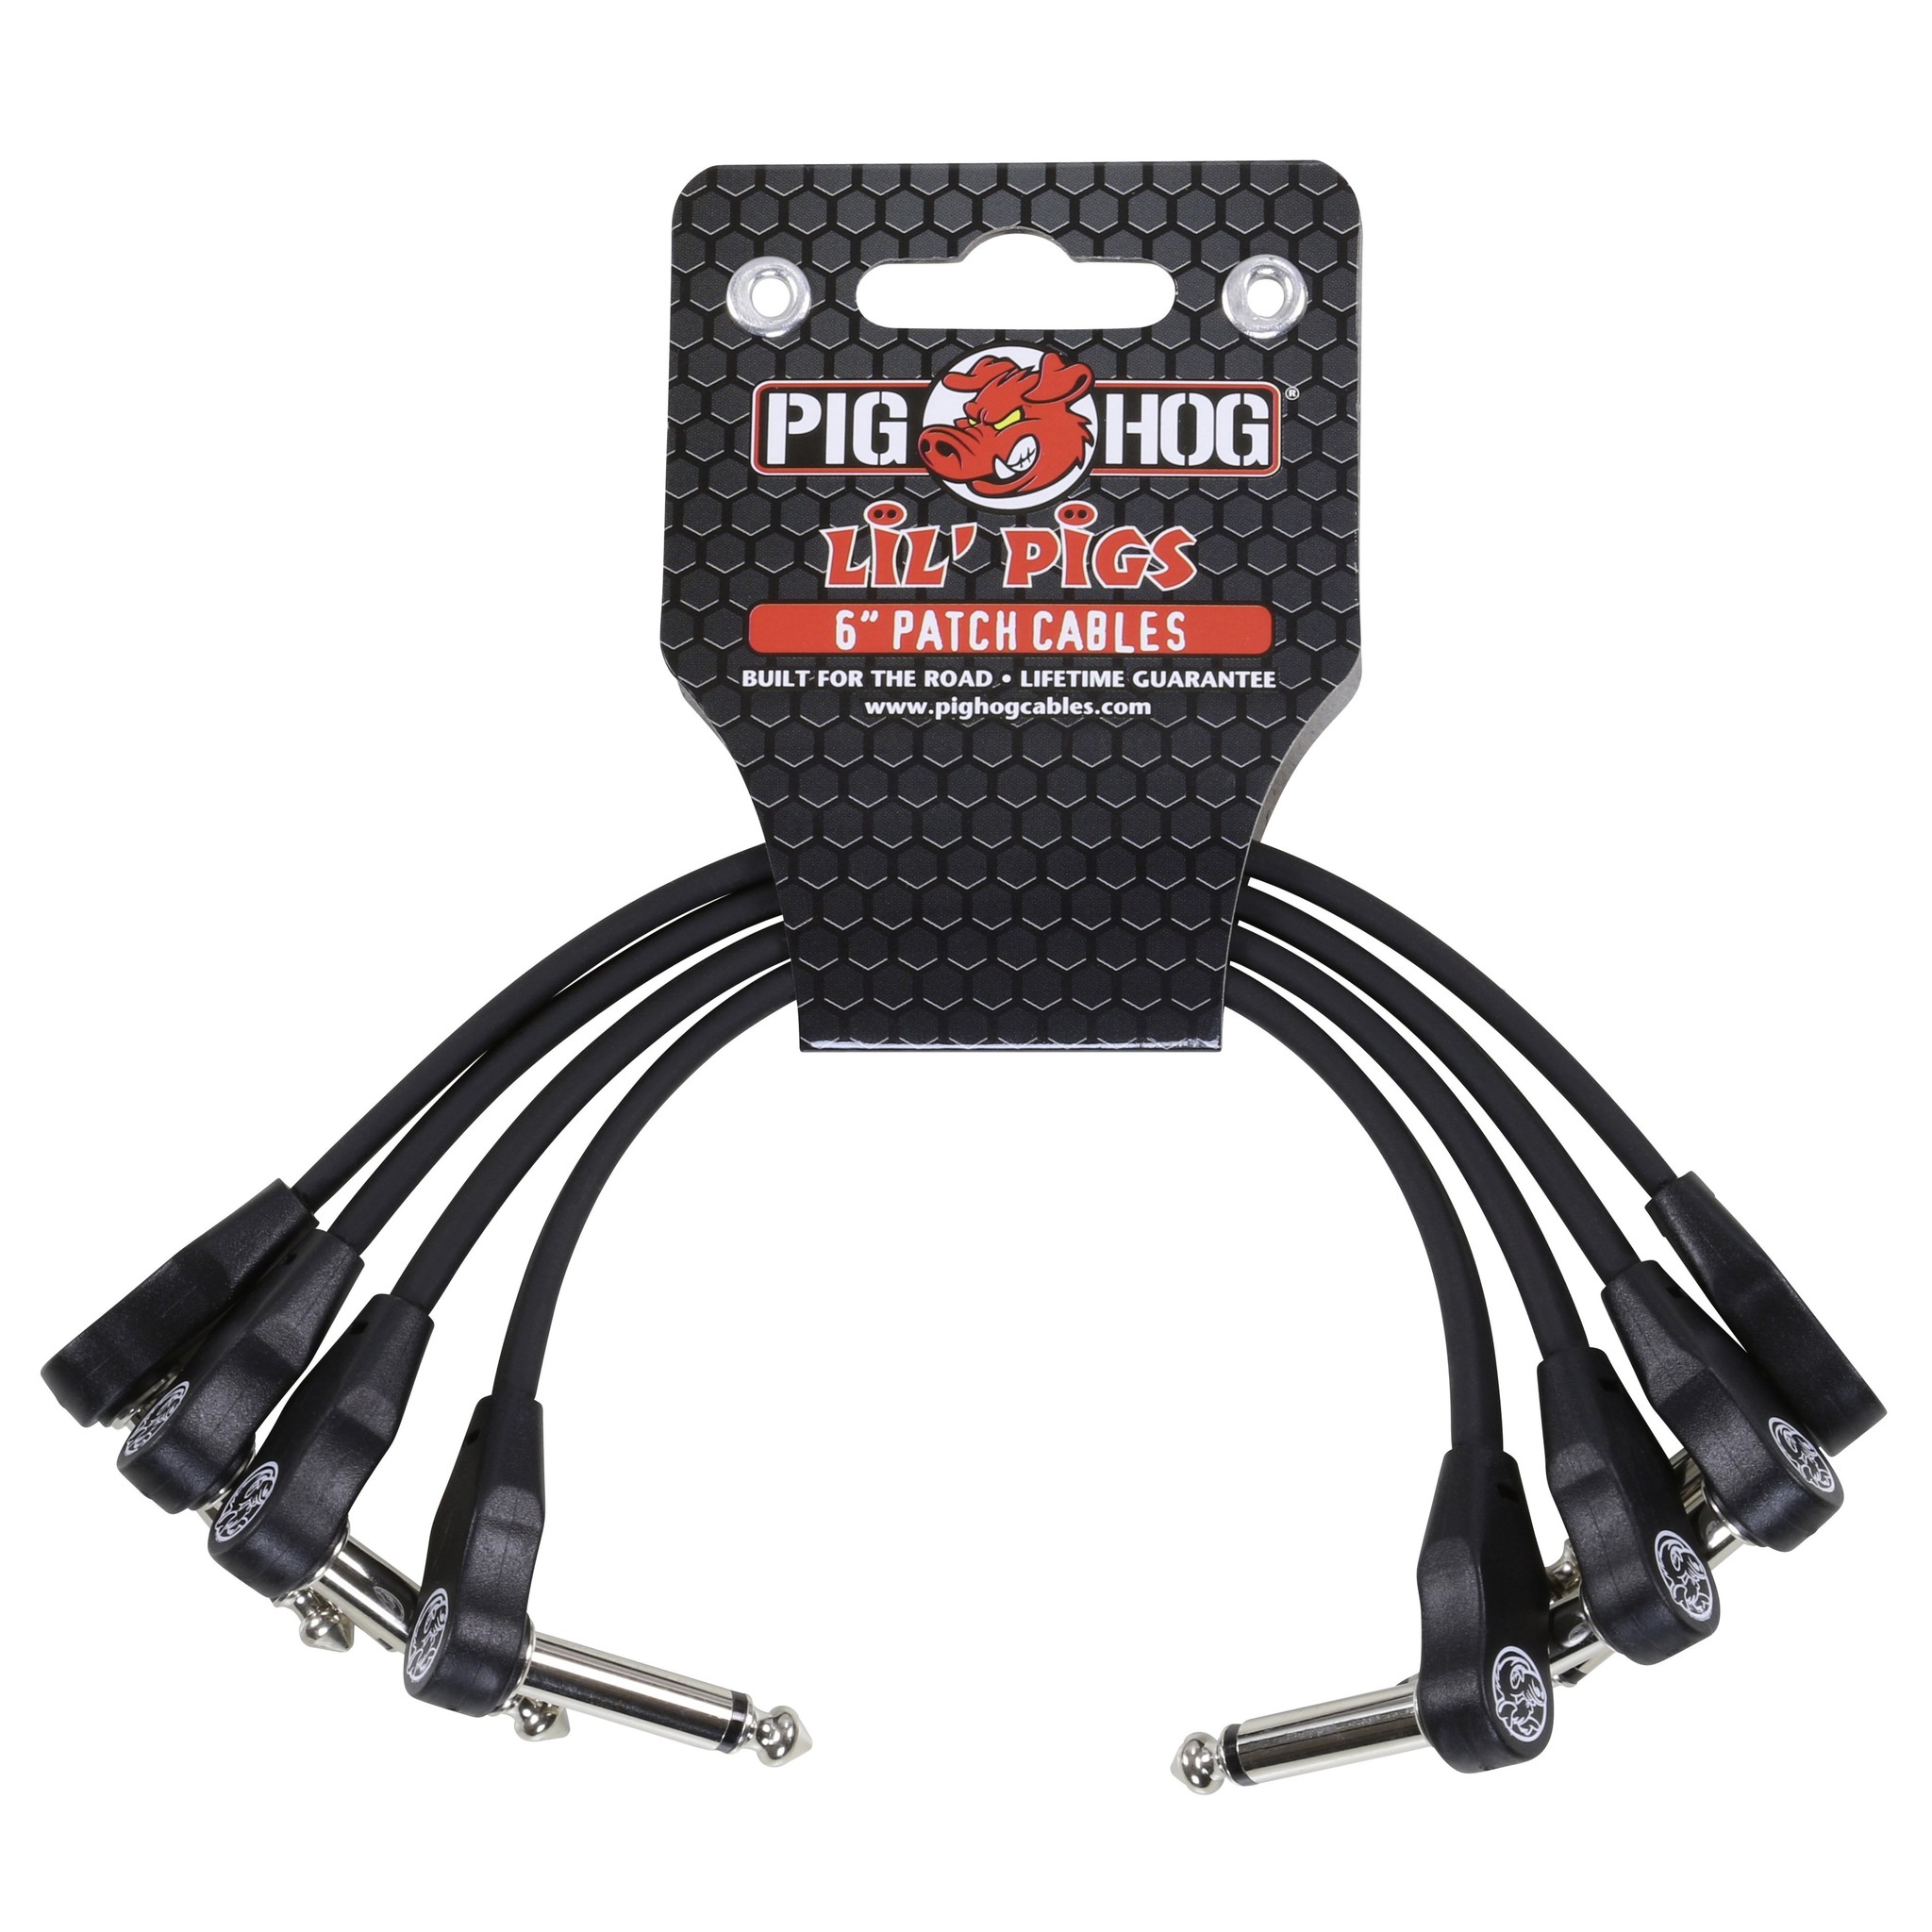 Pig Hog Lil' Pigs 6 inch Low Profile Flat Patch Cables - 4 PACK